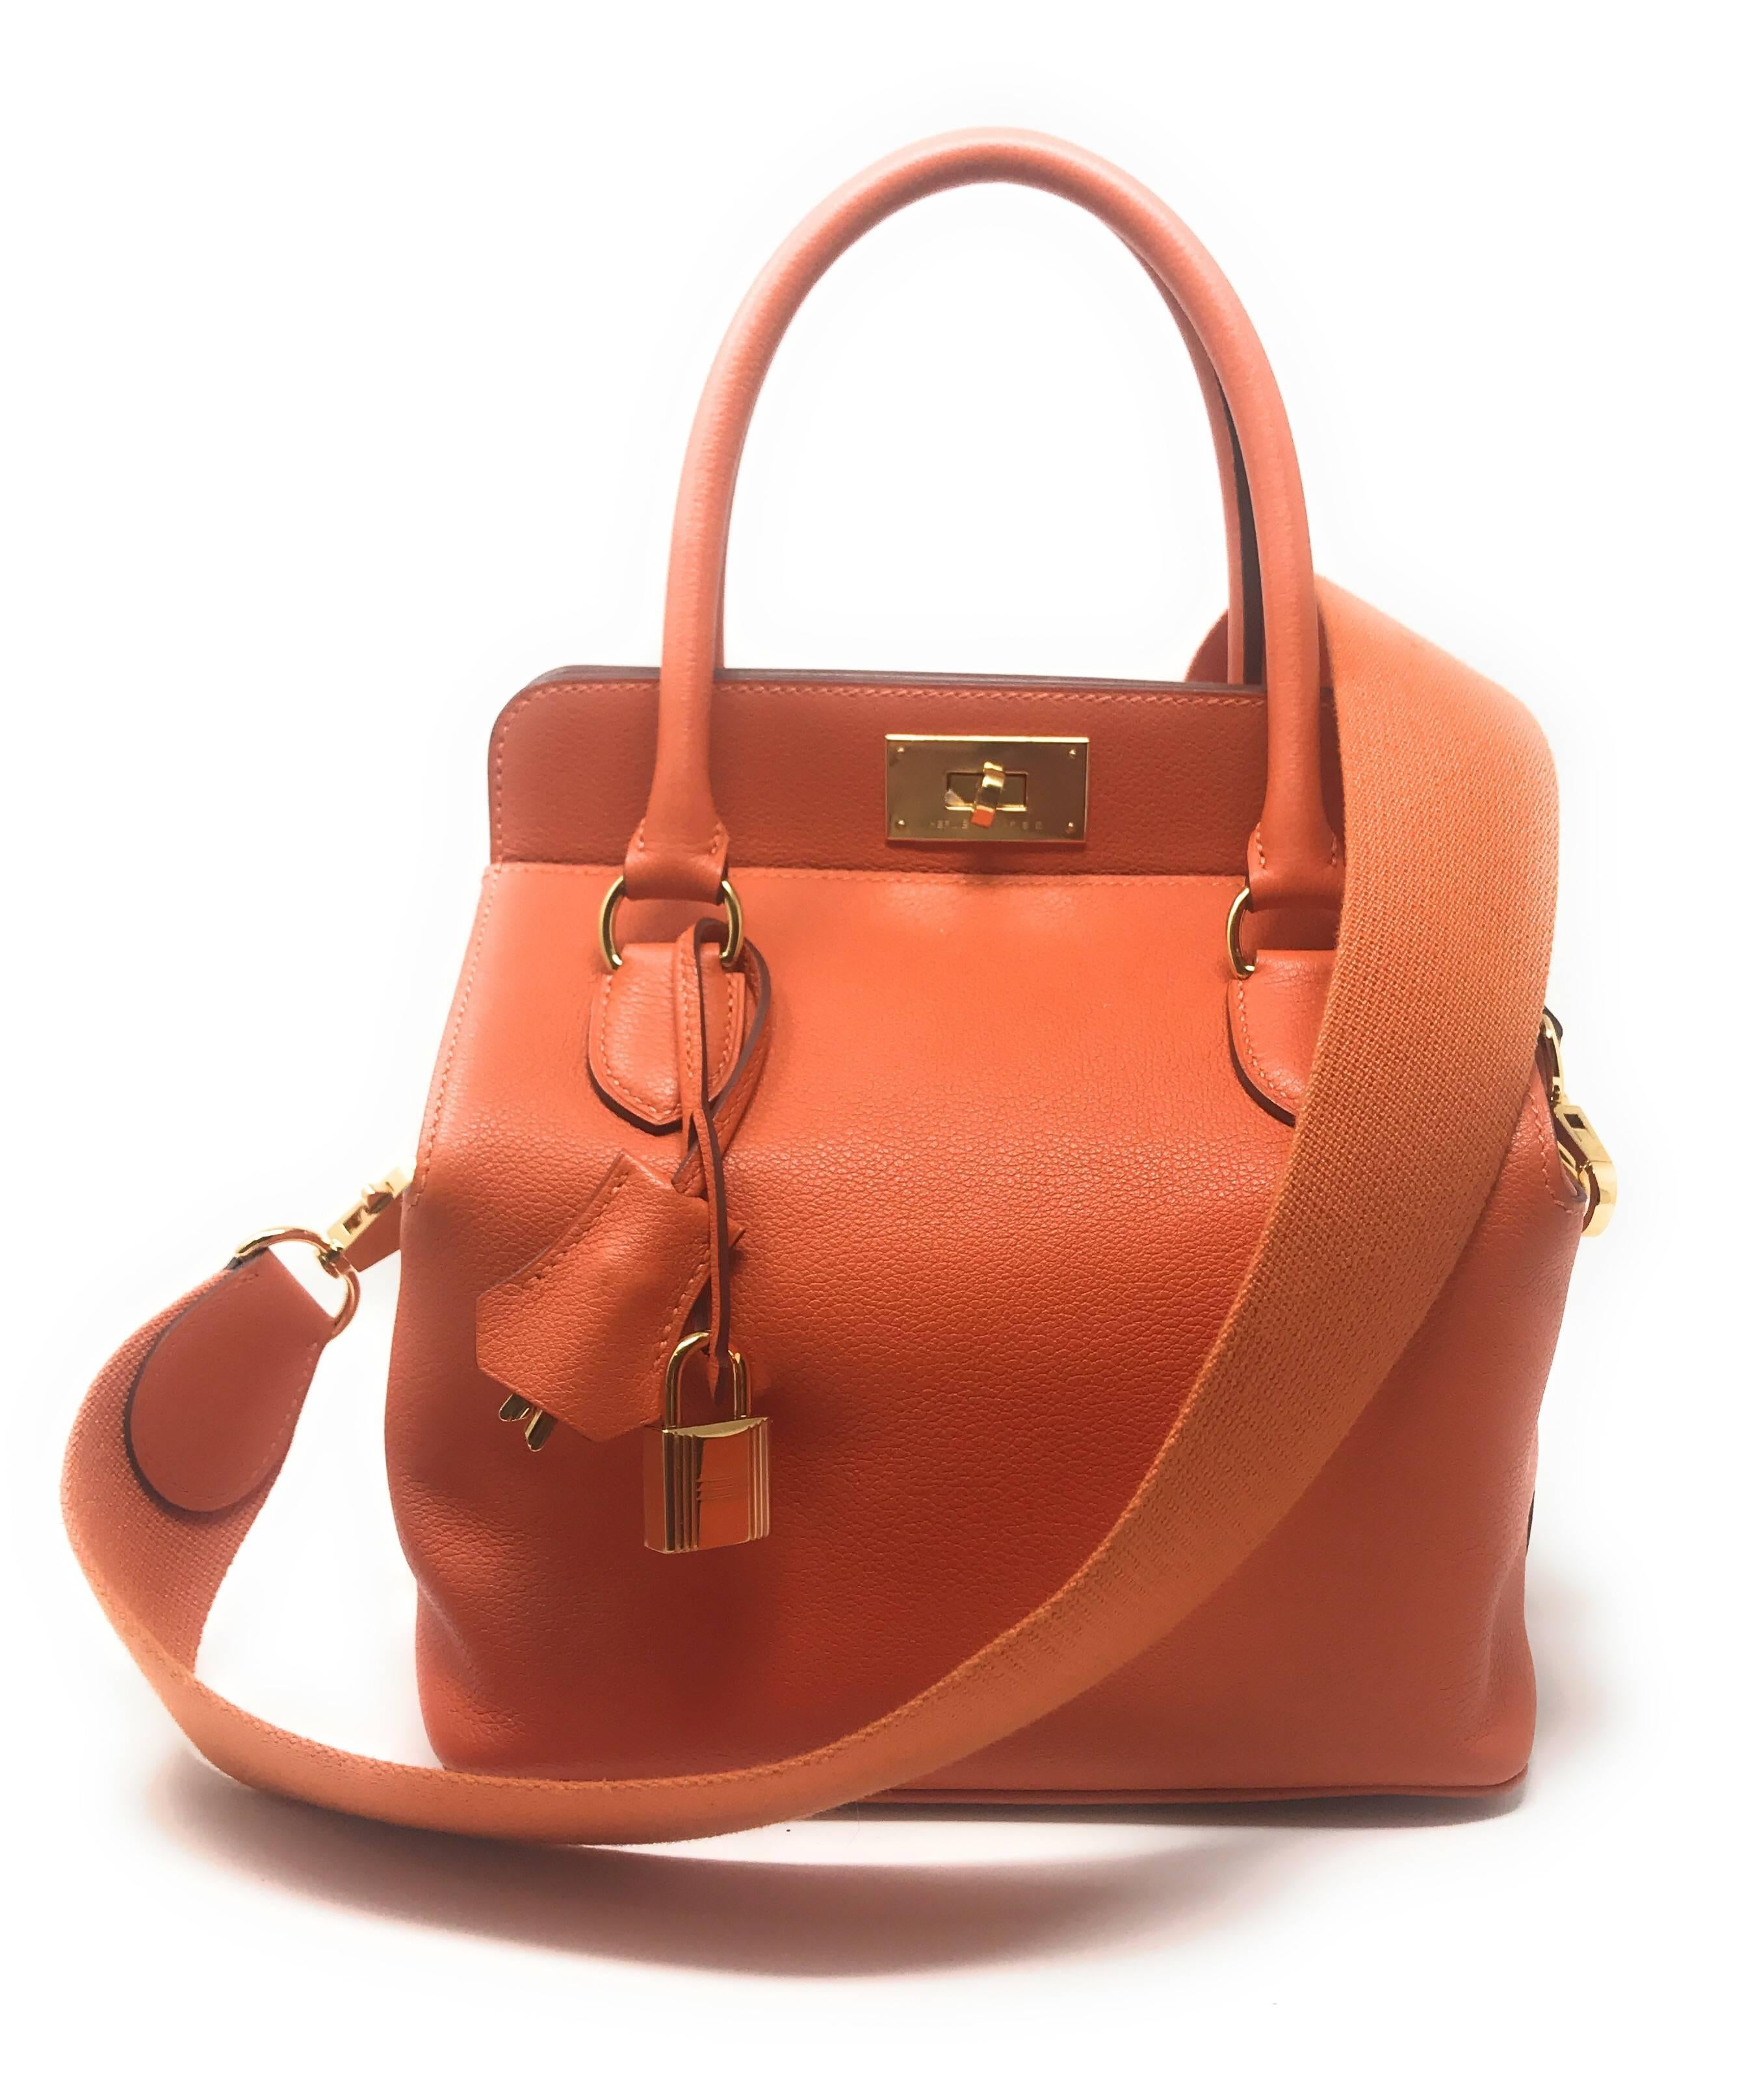 The Hermes Toolbox Tote Bag 20cm in Orange Feu (Fire) crafted in Evercolor leather with gold plated hardware. 
This bag’s debut was in 2010. It has 2 rolled top handles and the Hermes signature turn lock closure. It has a spacious interior with 3